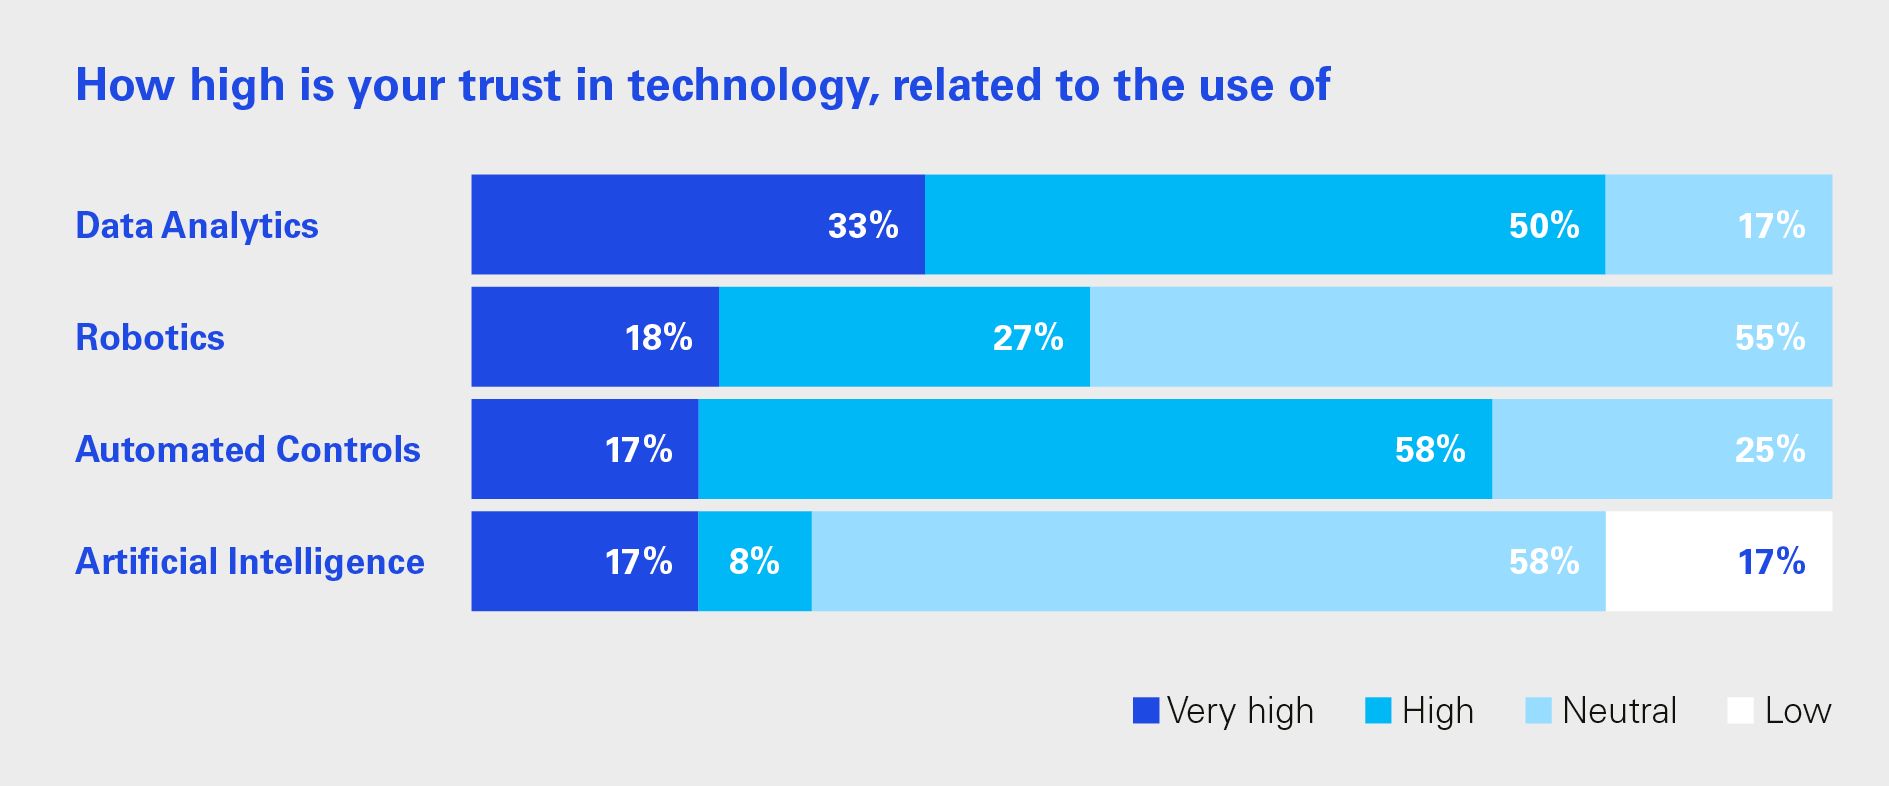 How high is your trust in technology, related to the us of